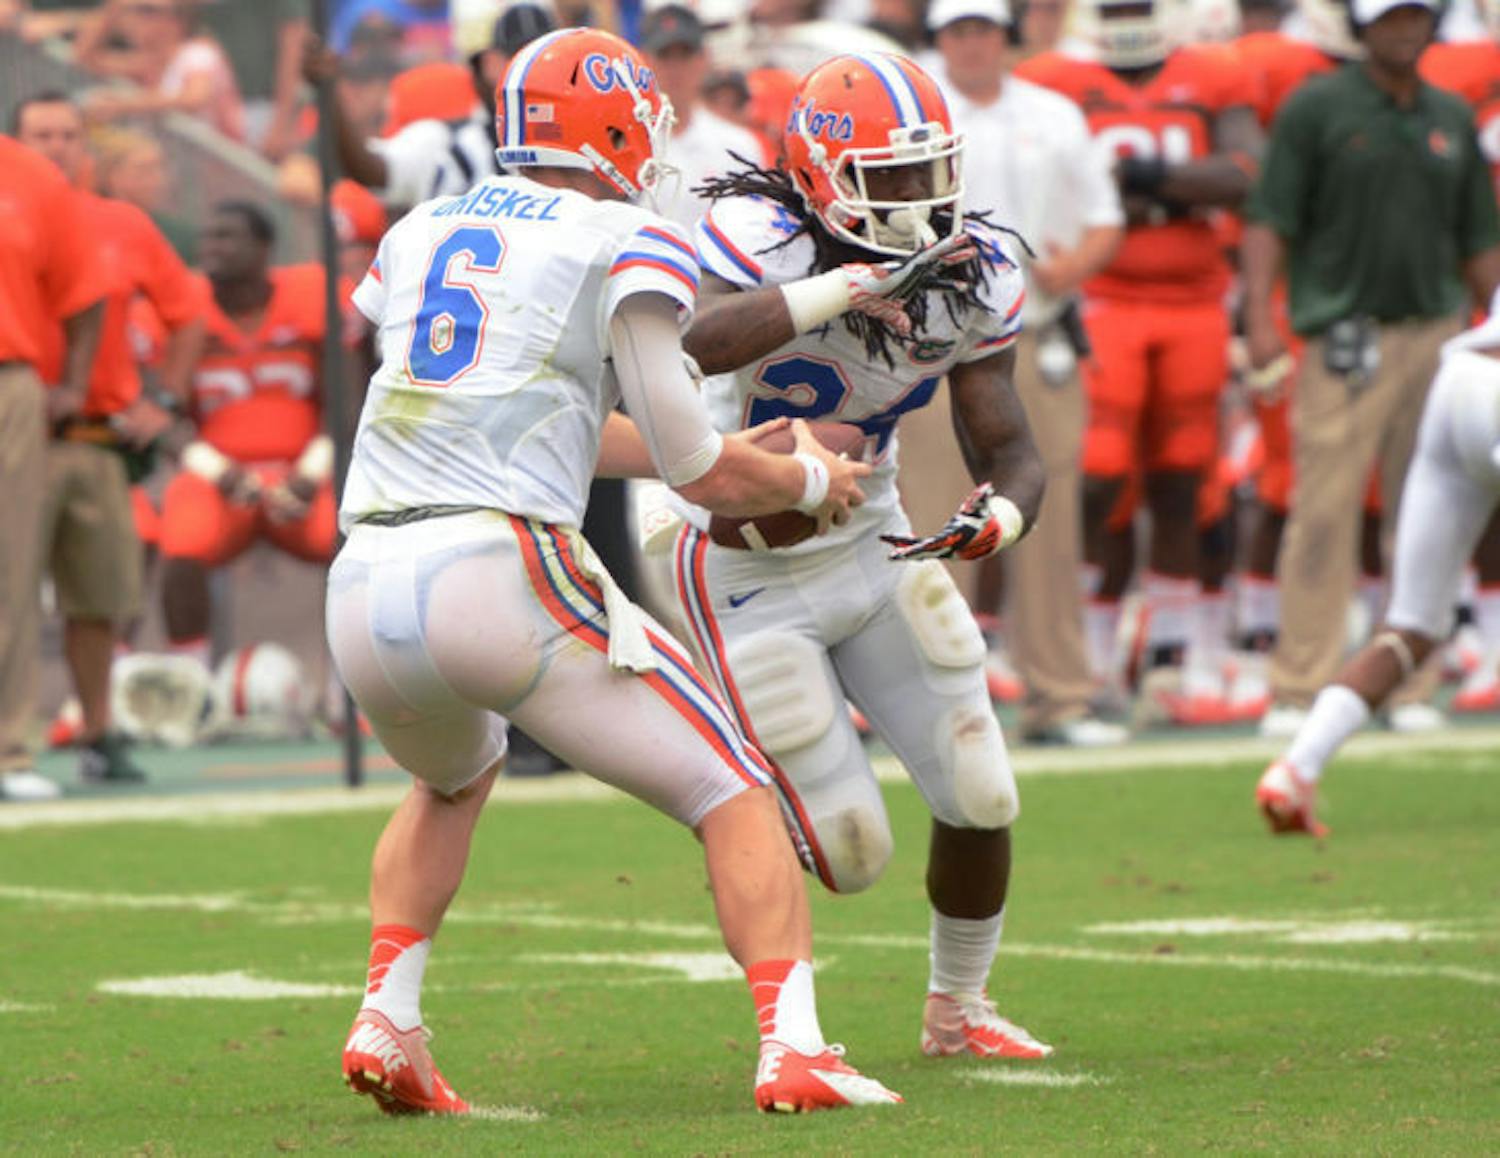 Matt Jones (24) reaches for the ball on a play-action pass from quarterback Jeff Driskel (6) during Florida’s 21-16 loss against Miami on Sept. 7 in Sun Life Stadium.